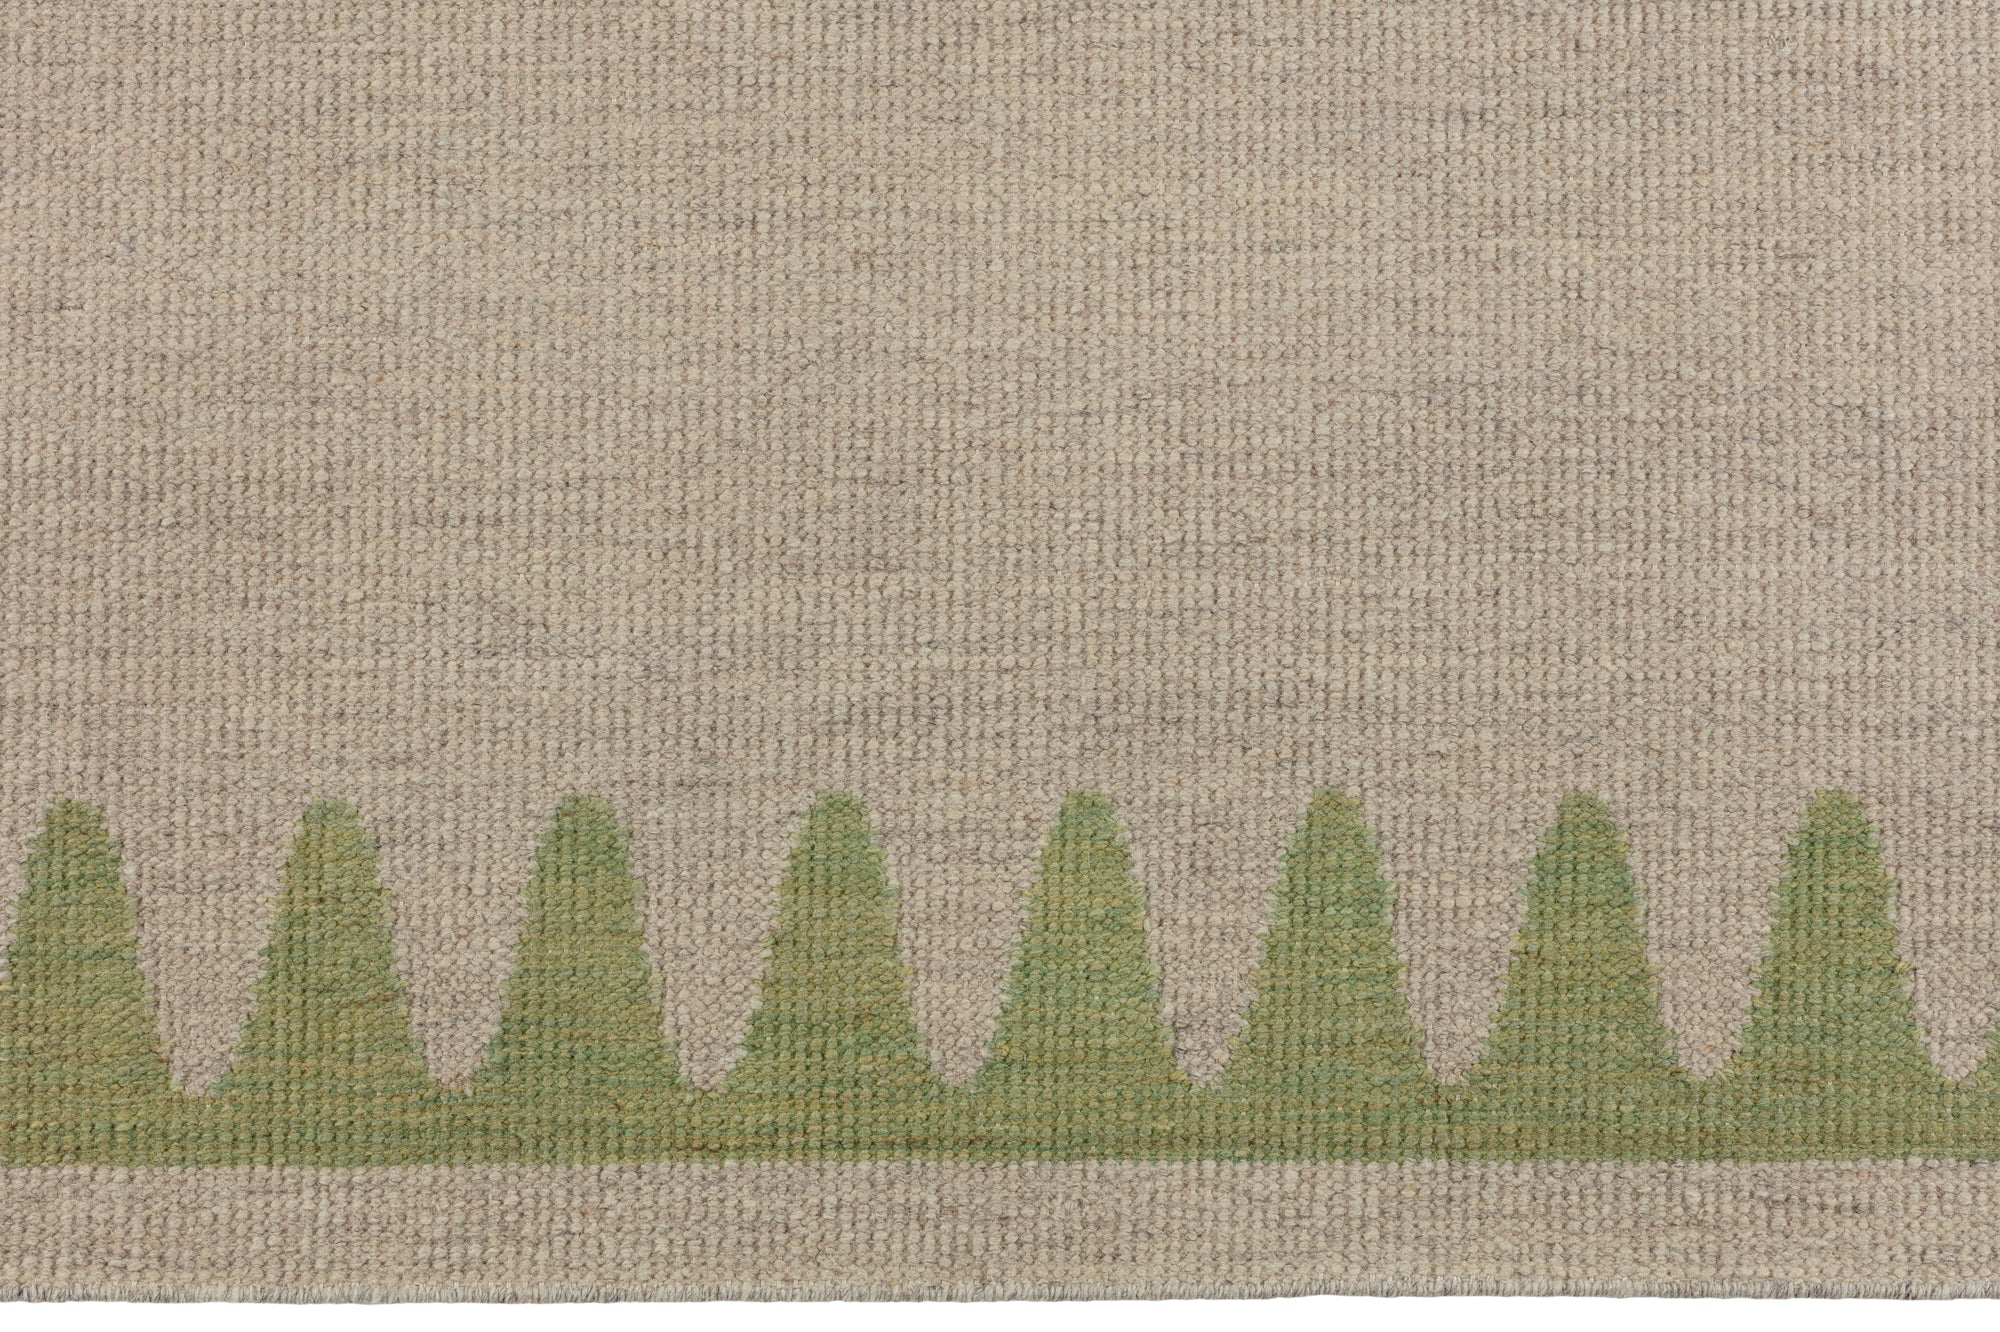 Detail of the Waver Rug in Sage, a strated taupe field with a sage green flame stitch border. 